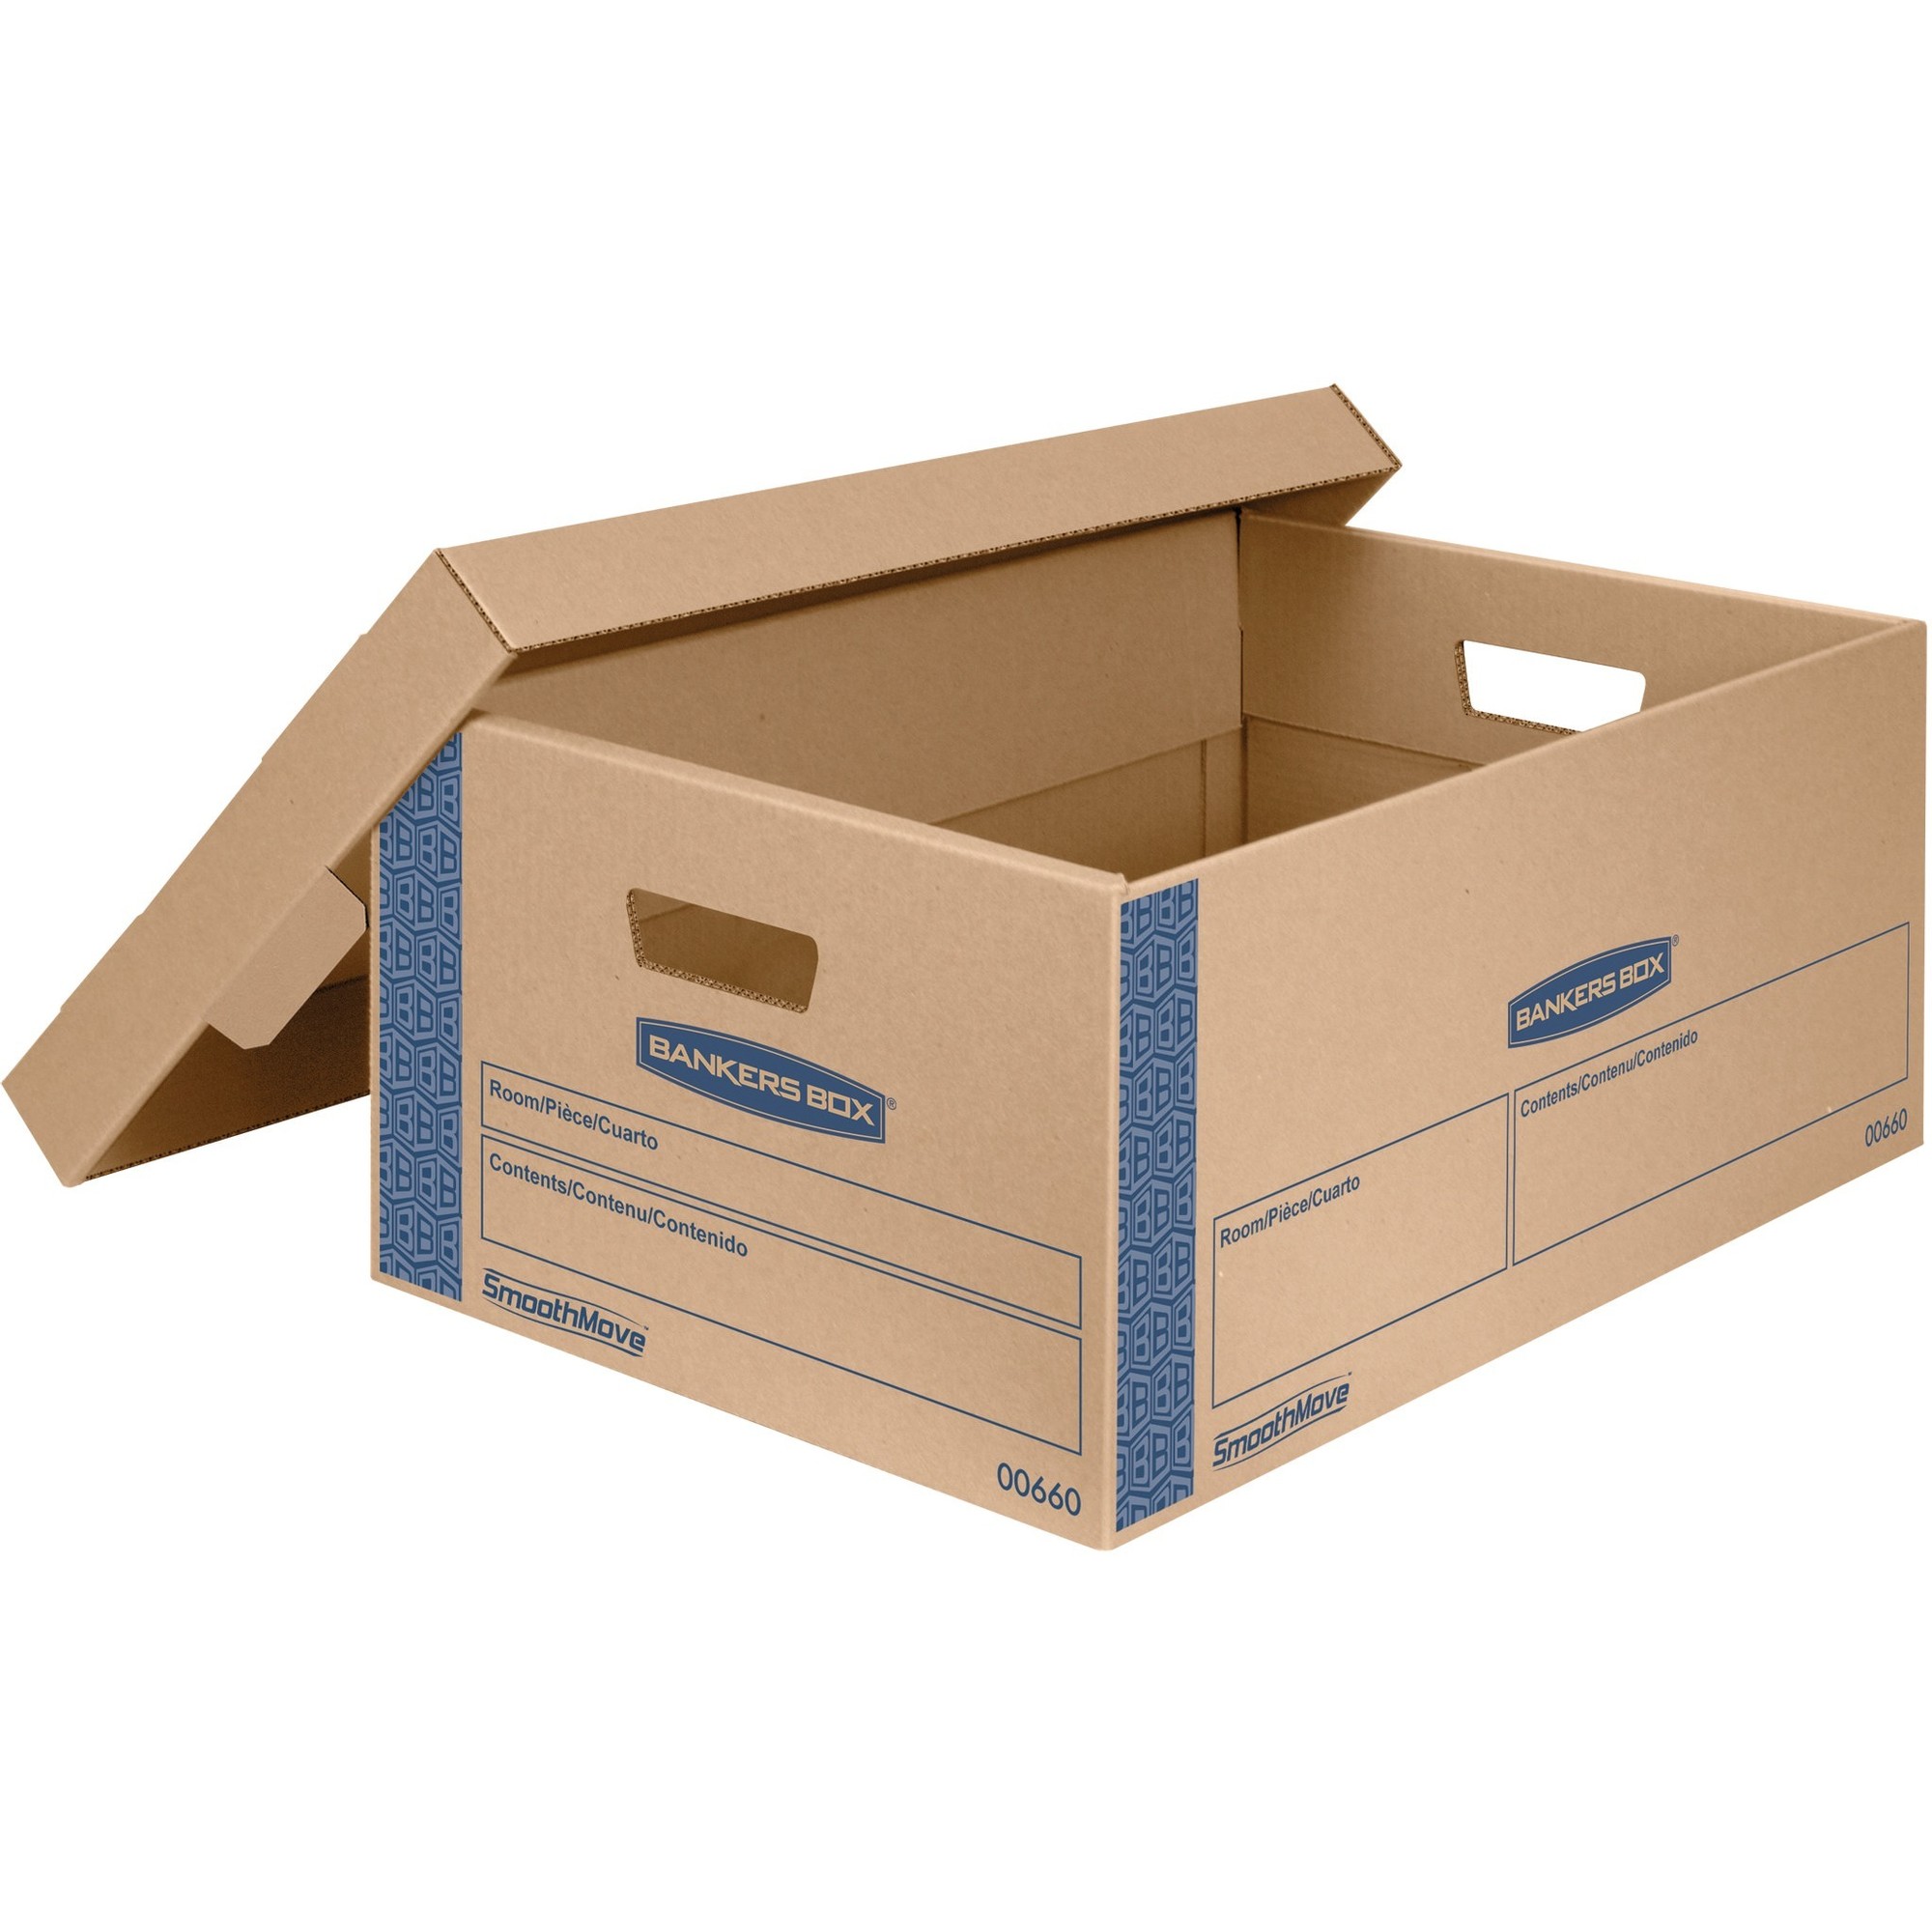 Bankers Box SmoothMove Moving Boxes - Internal Dimensions: 15" Width x 24" Depth x 10" Height - External Dimensions: 15.9" Width